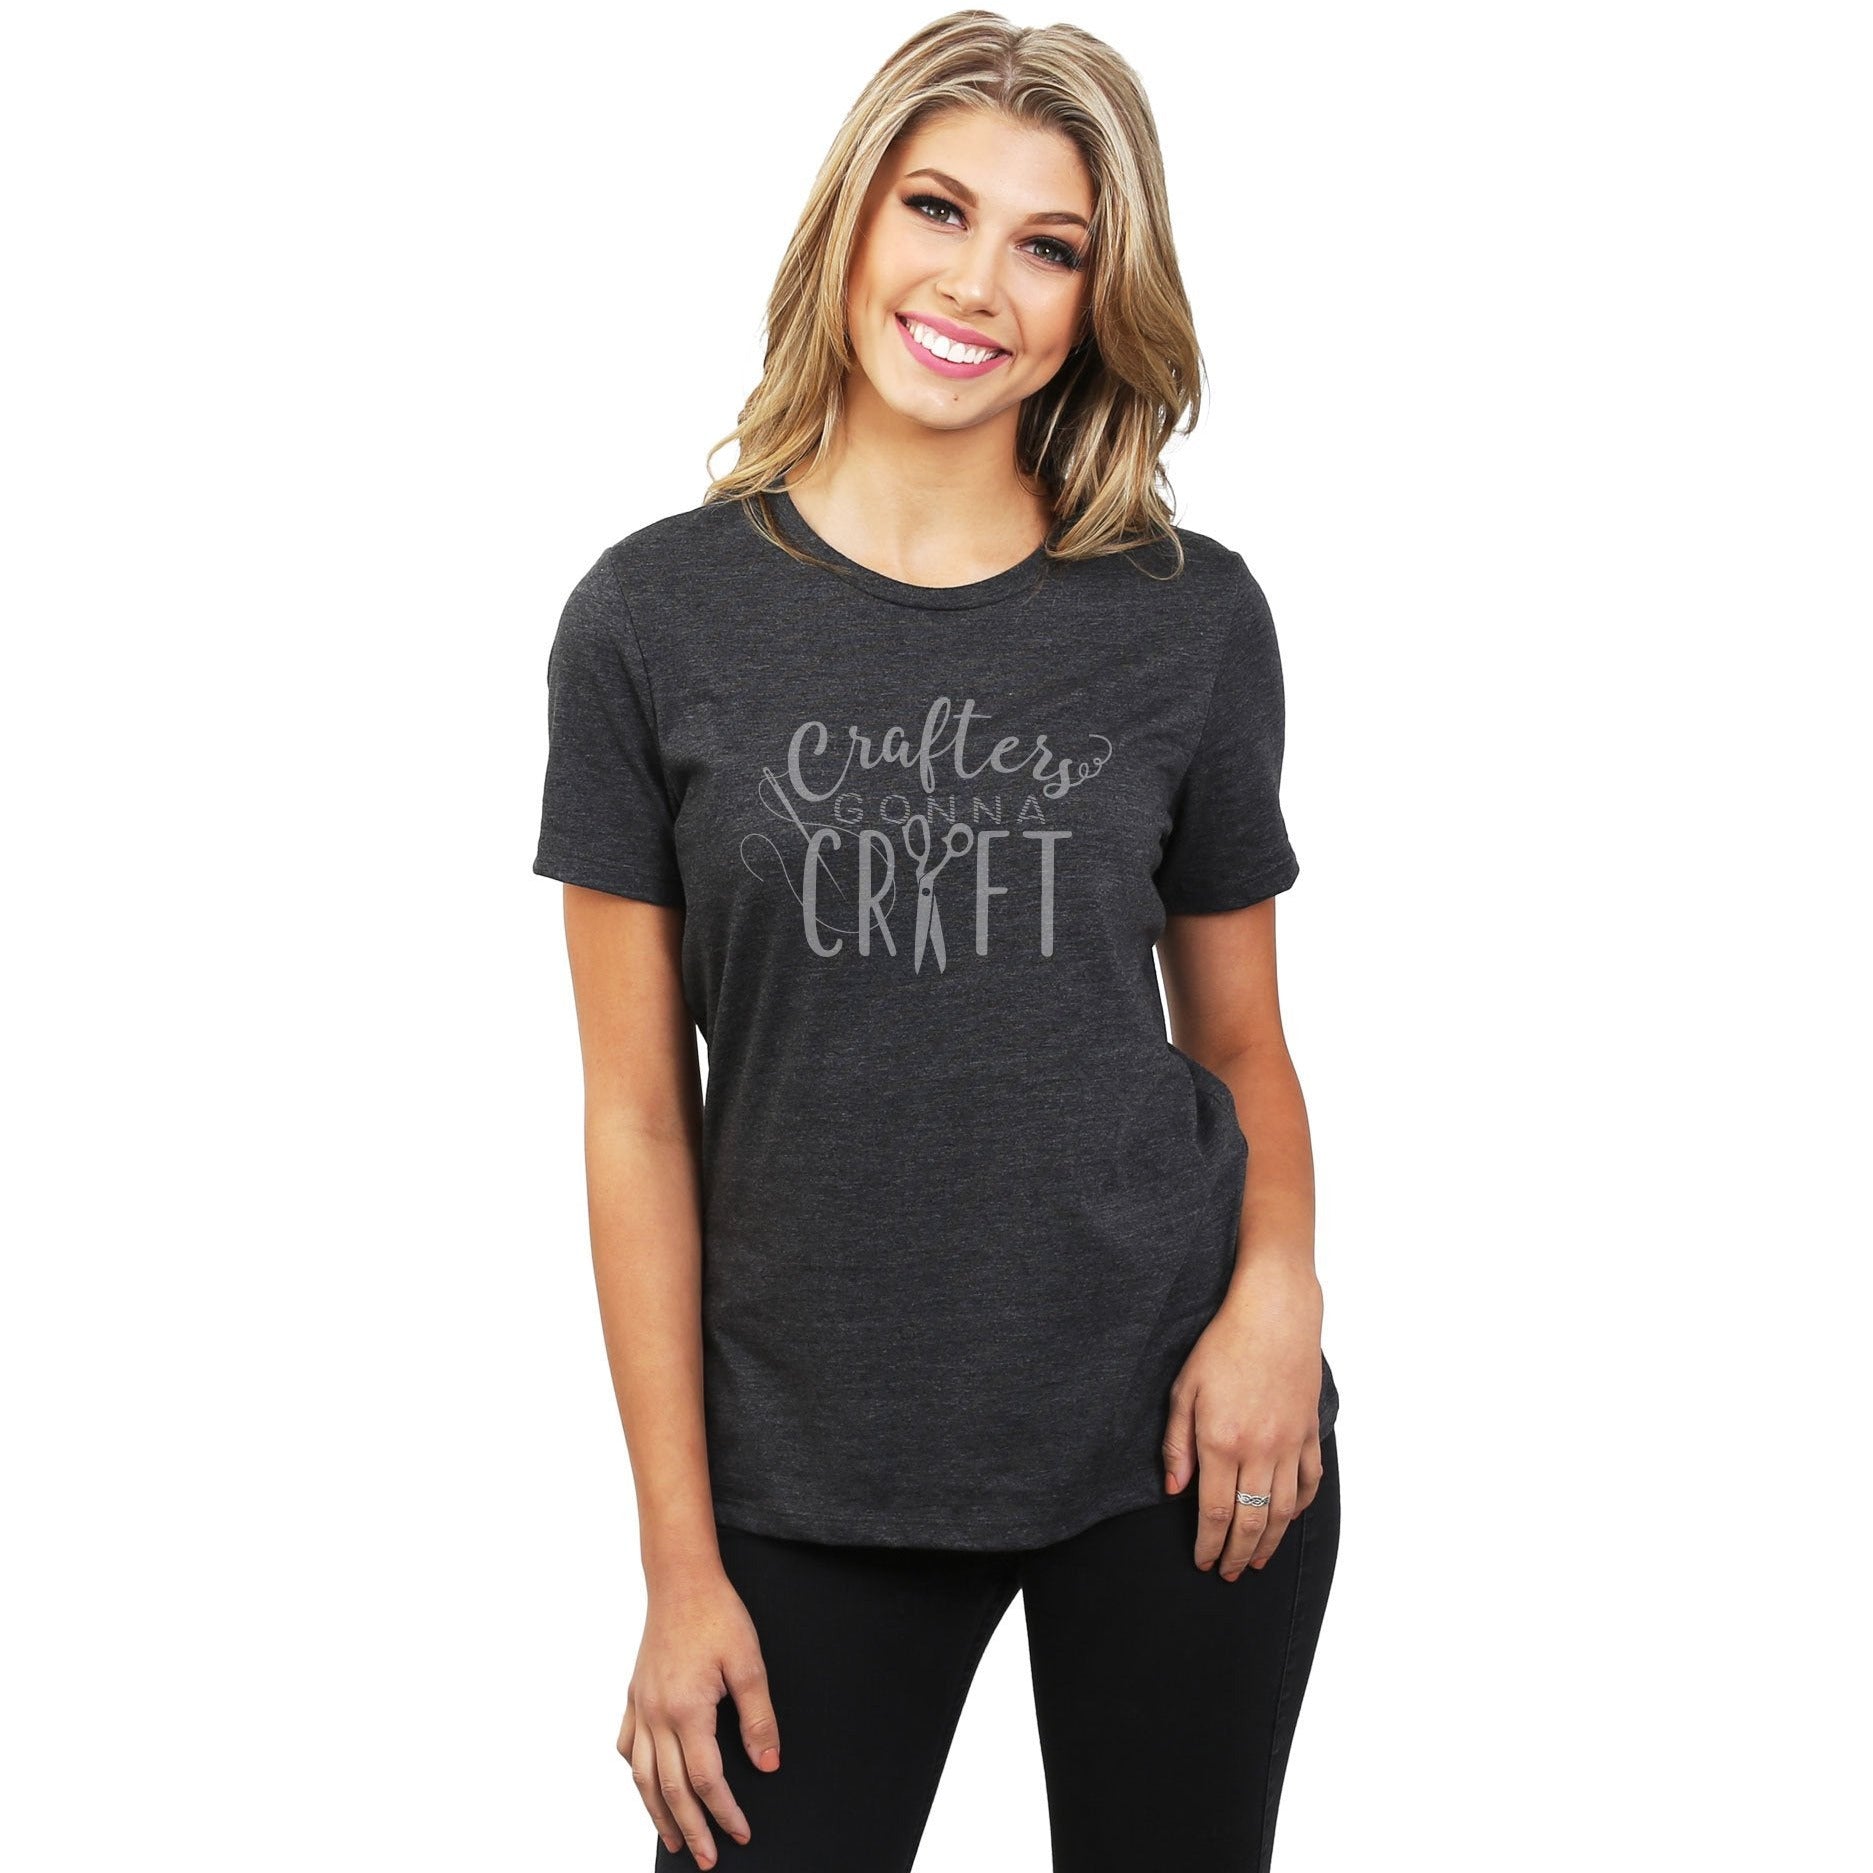 Crafters Gonna Craft Women's Relaxed Crewneck T-Shirt Top Tee Charcoal Model
